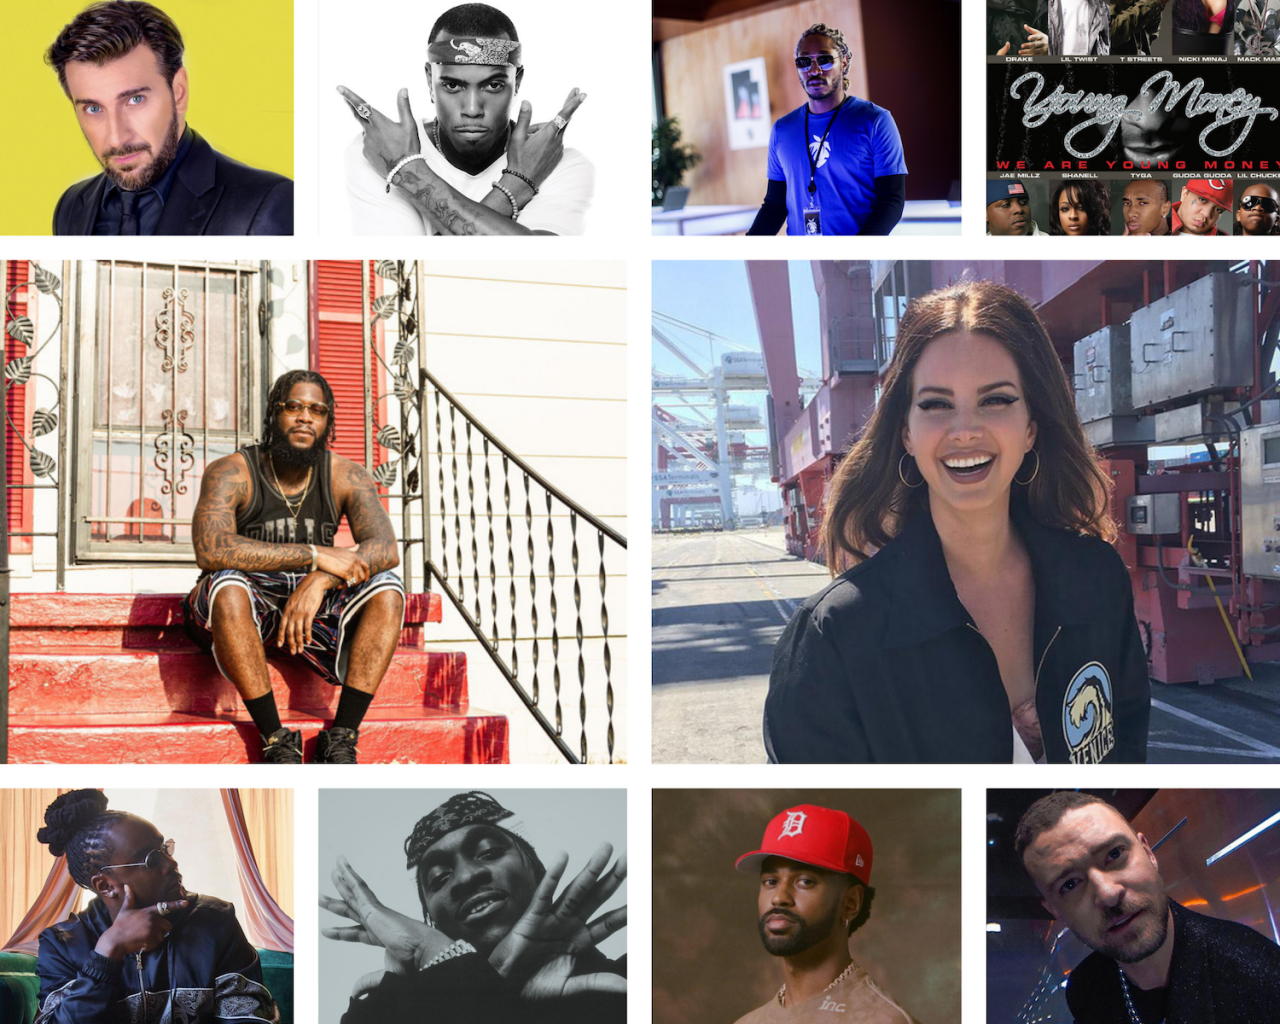 The 10 biggest artists on SoundCloud in 2021 RouteNote Blog